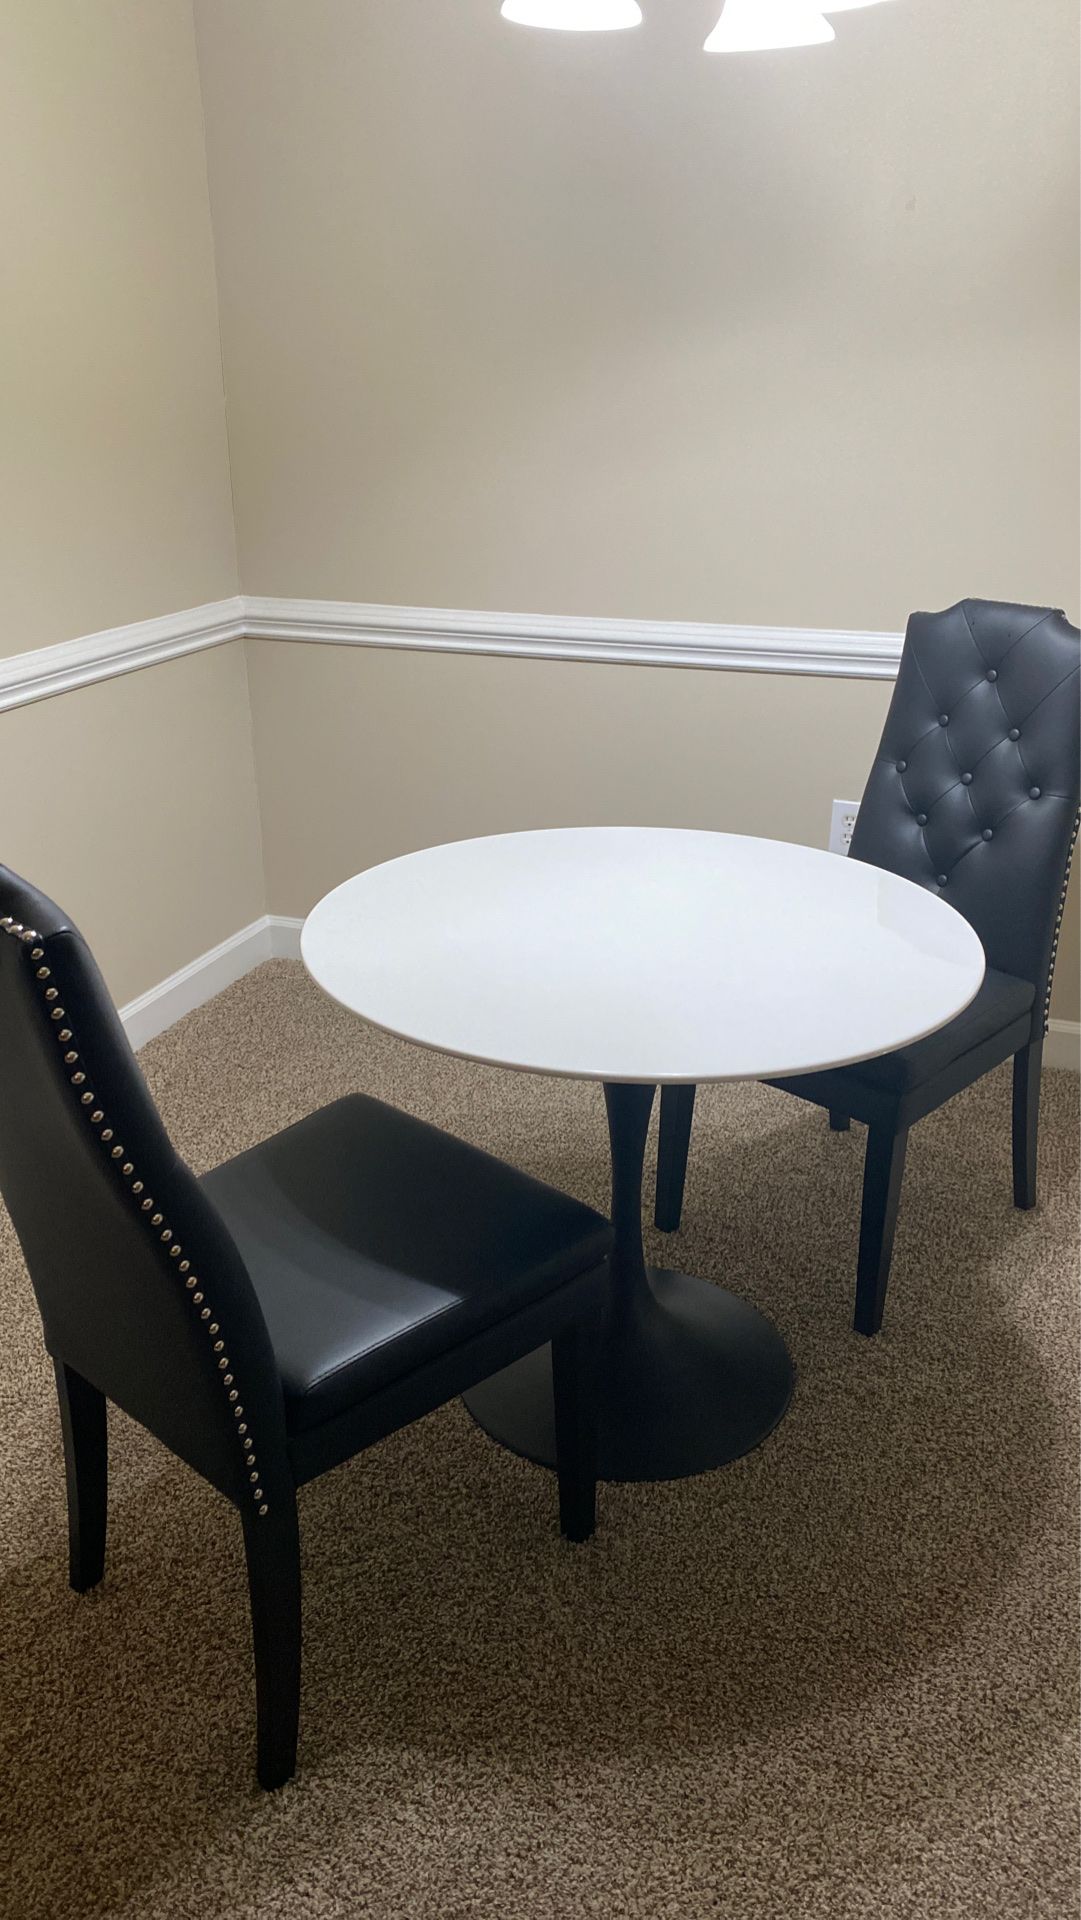 Dining table and 2 chairs